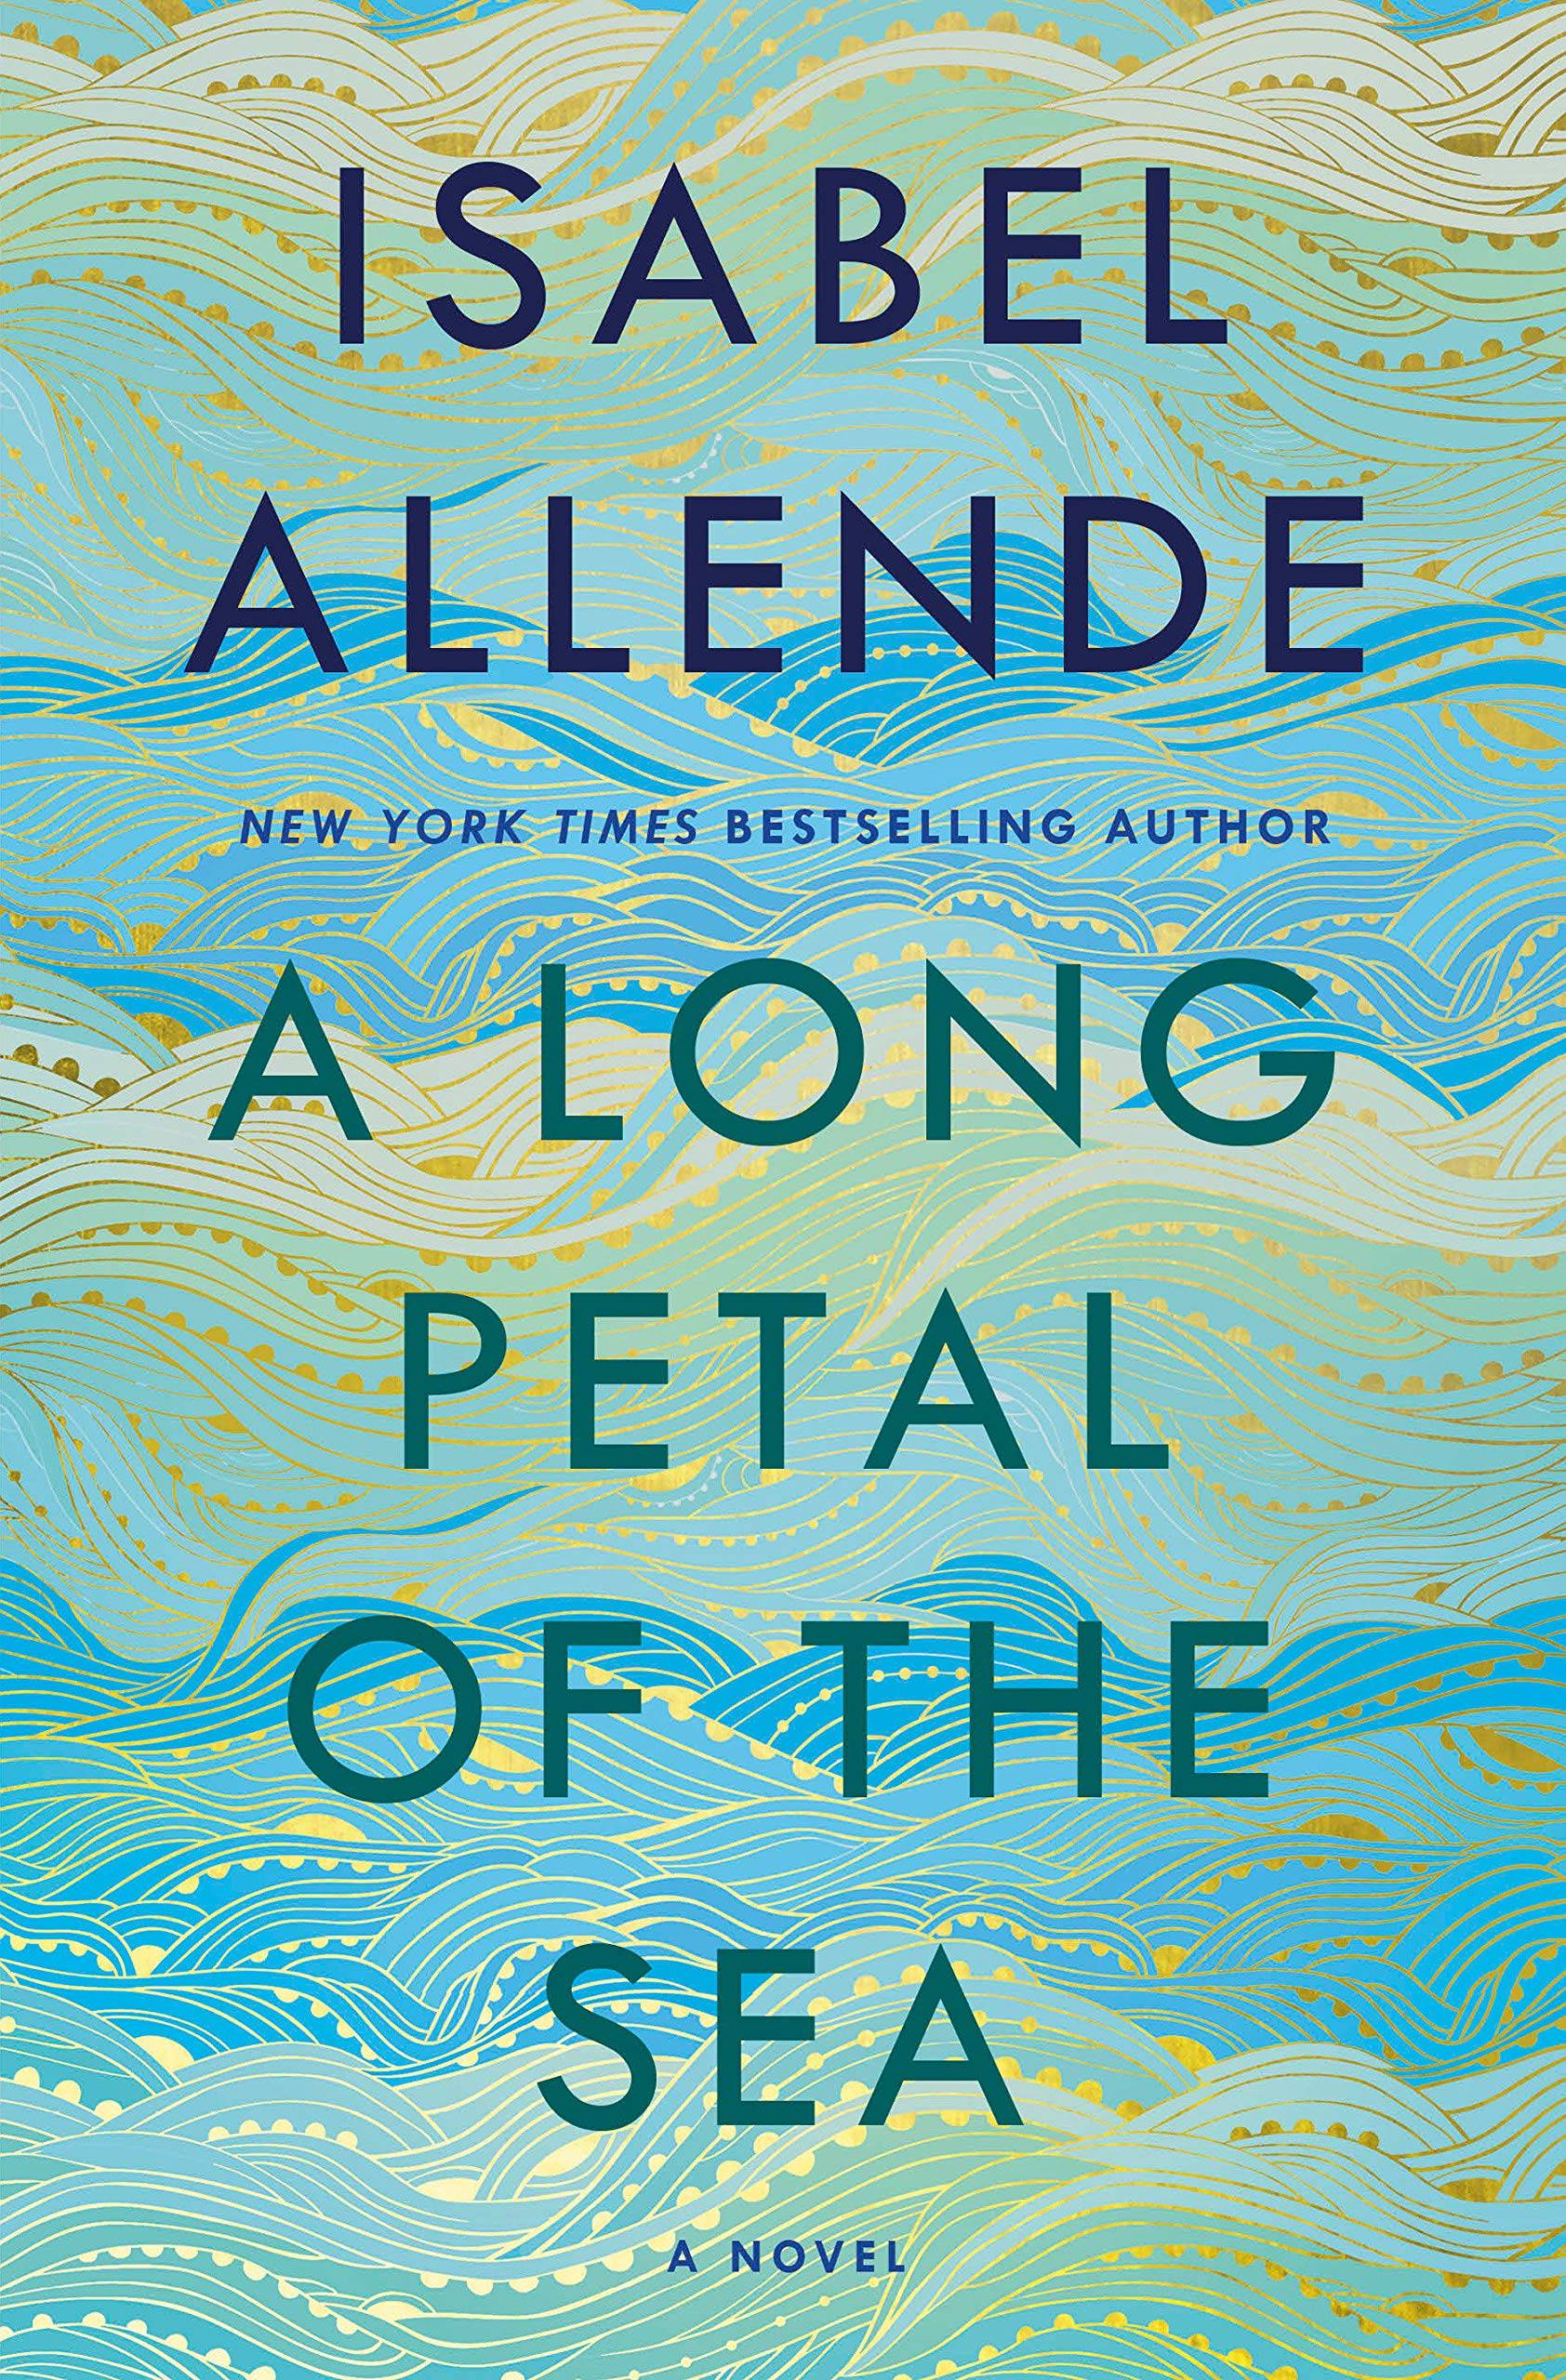 "a long petal of the sea" cover with the title text in front of various shades of blue and green illustrated waves.